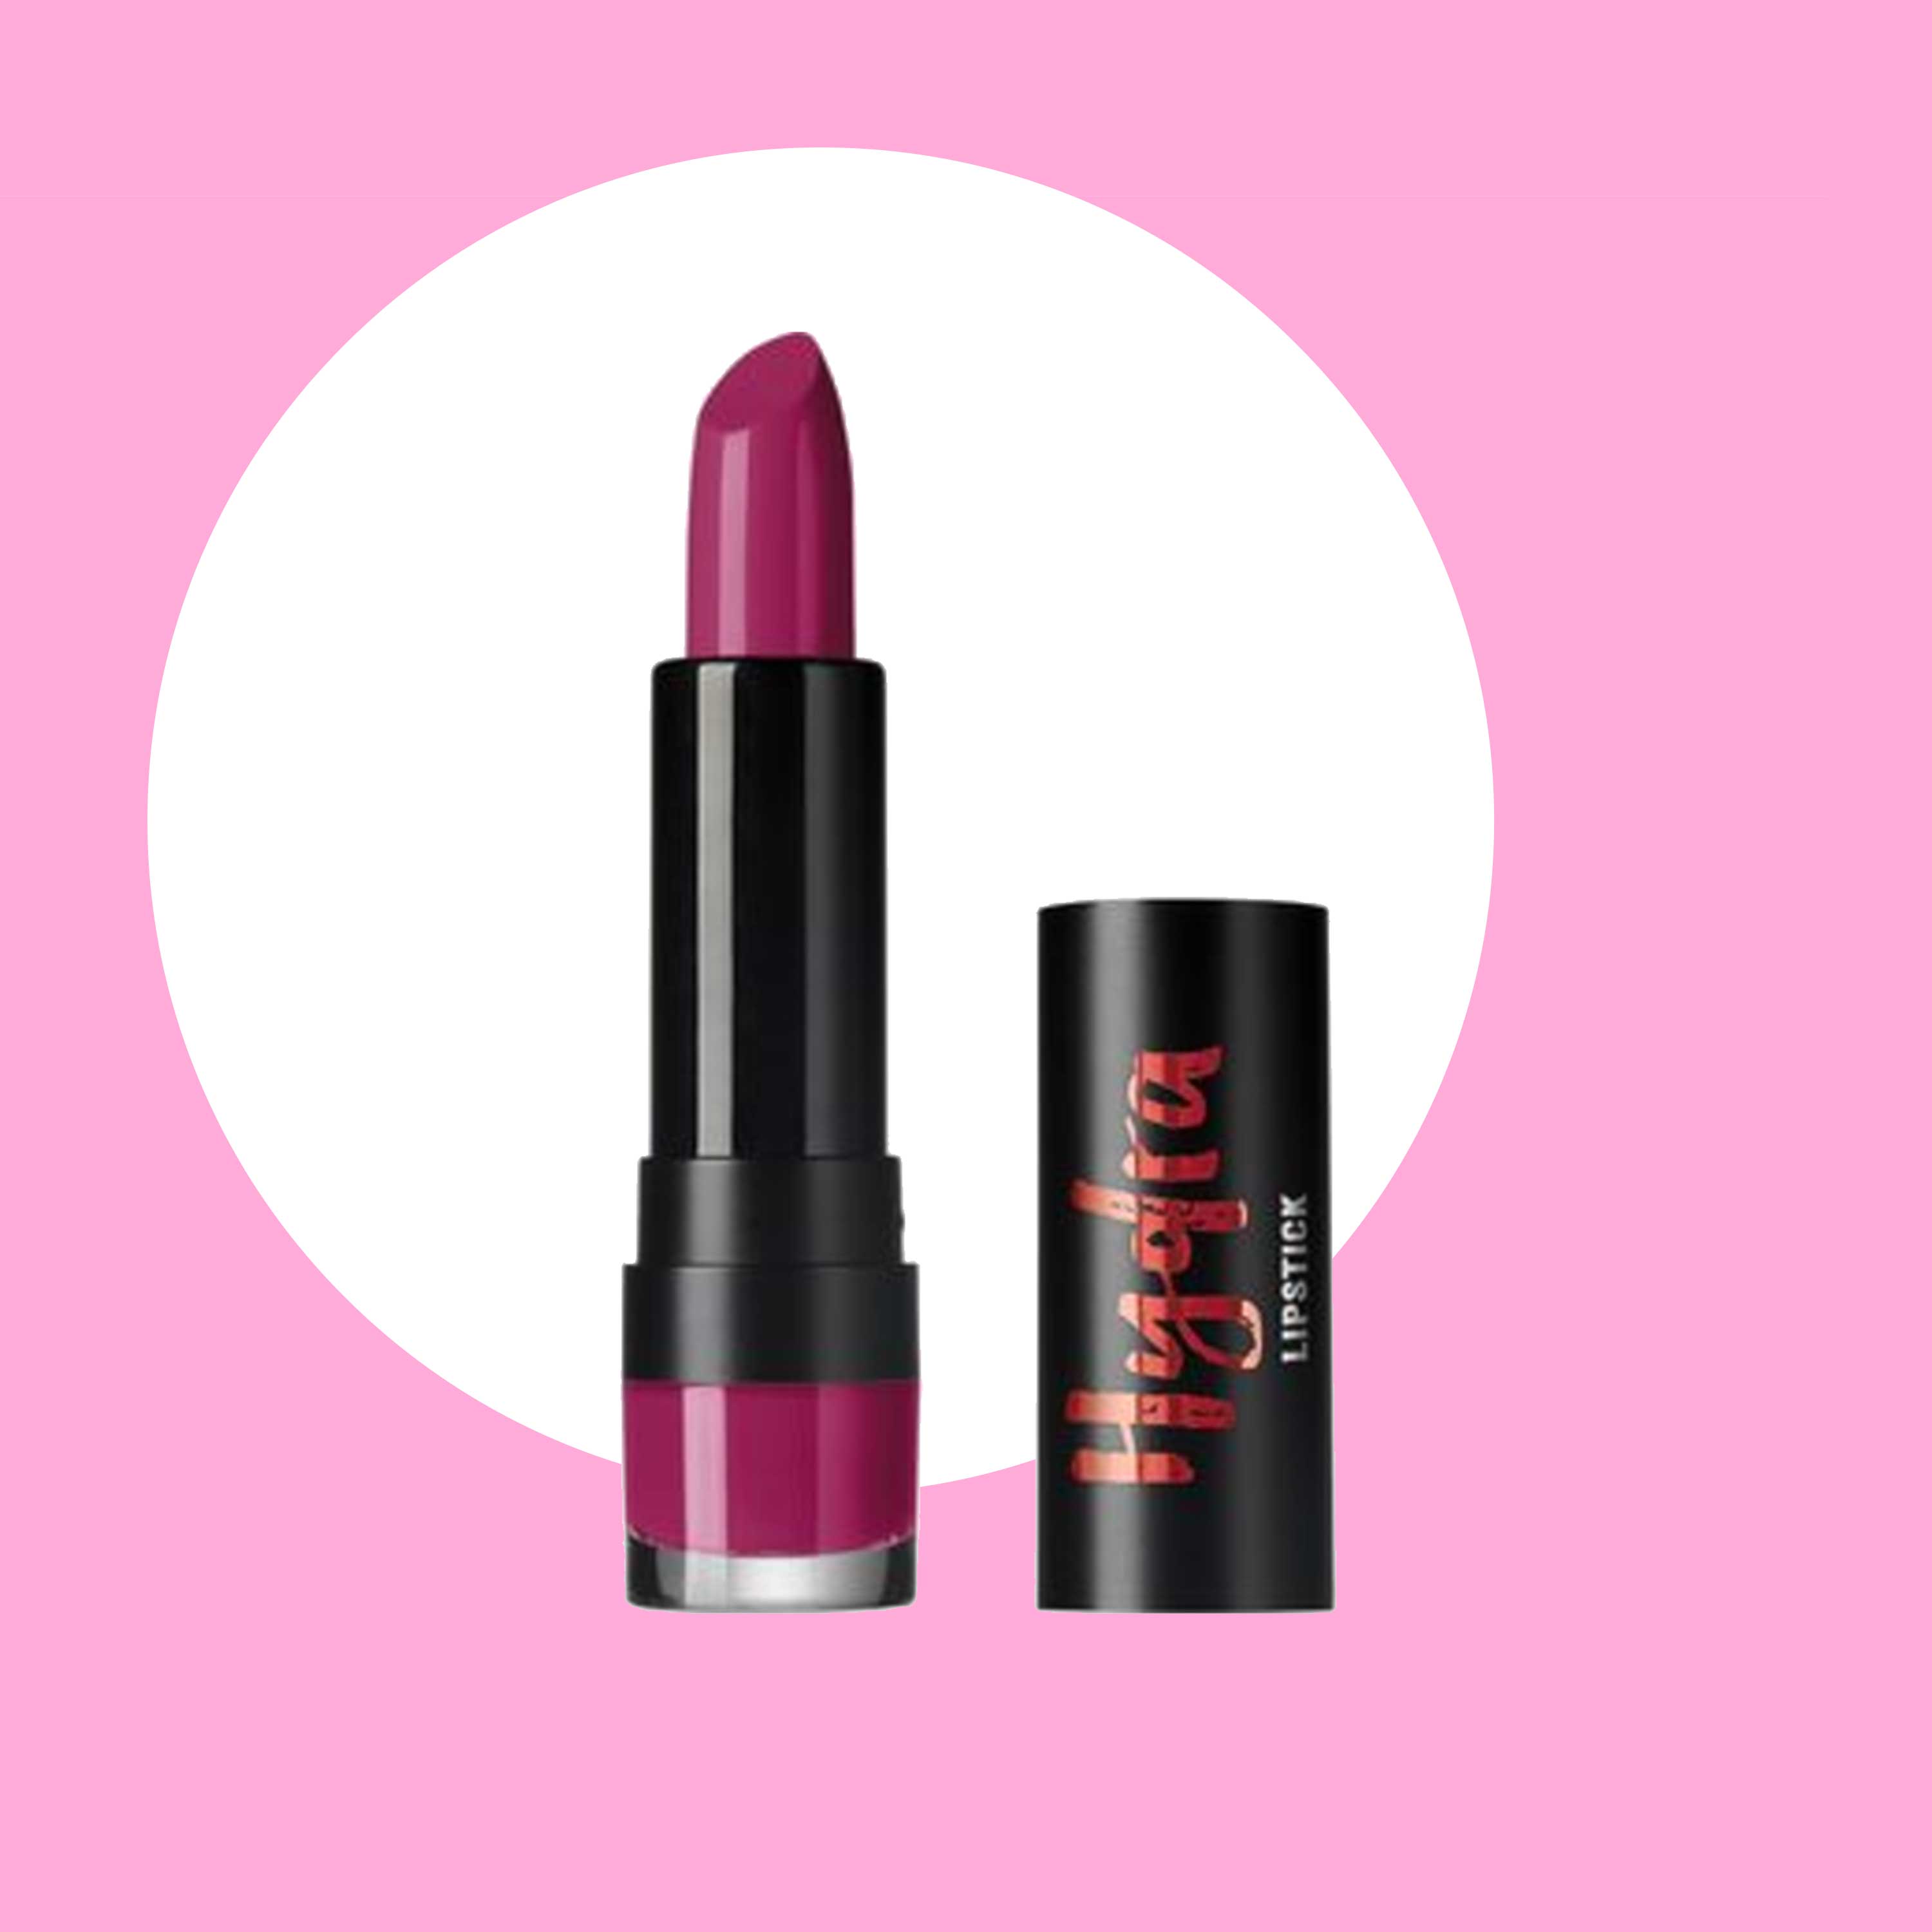 These Are the Beauty Products You Need Before Summer Ends
